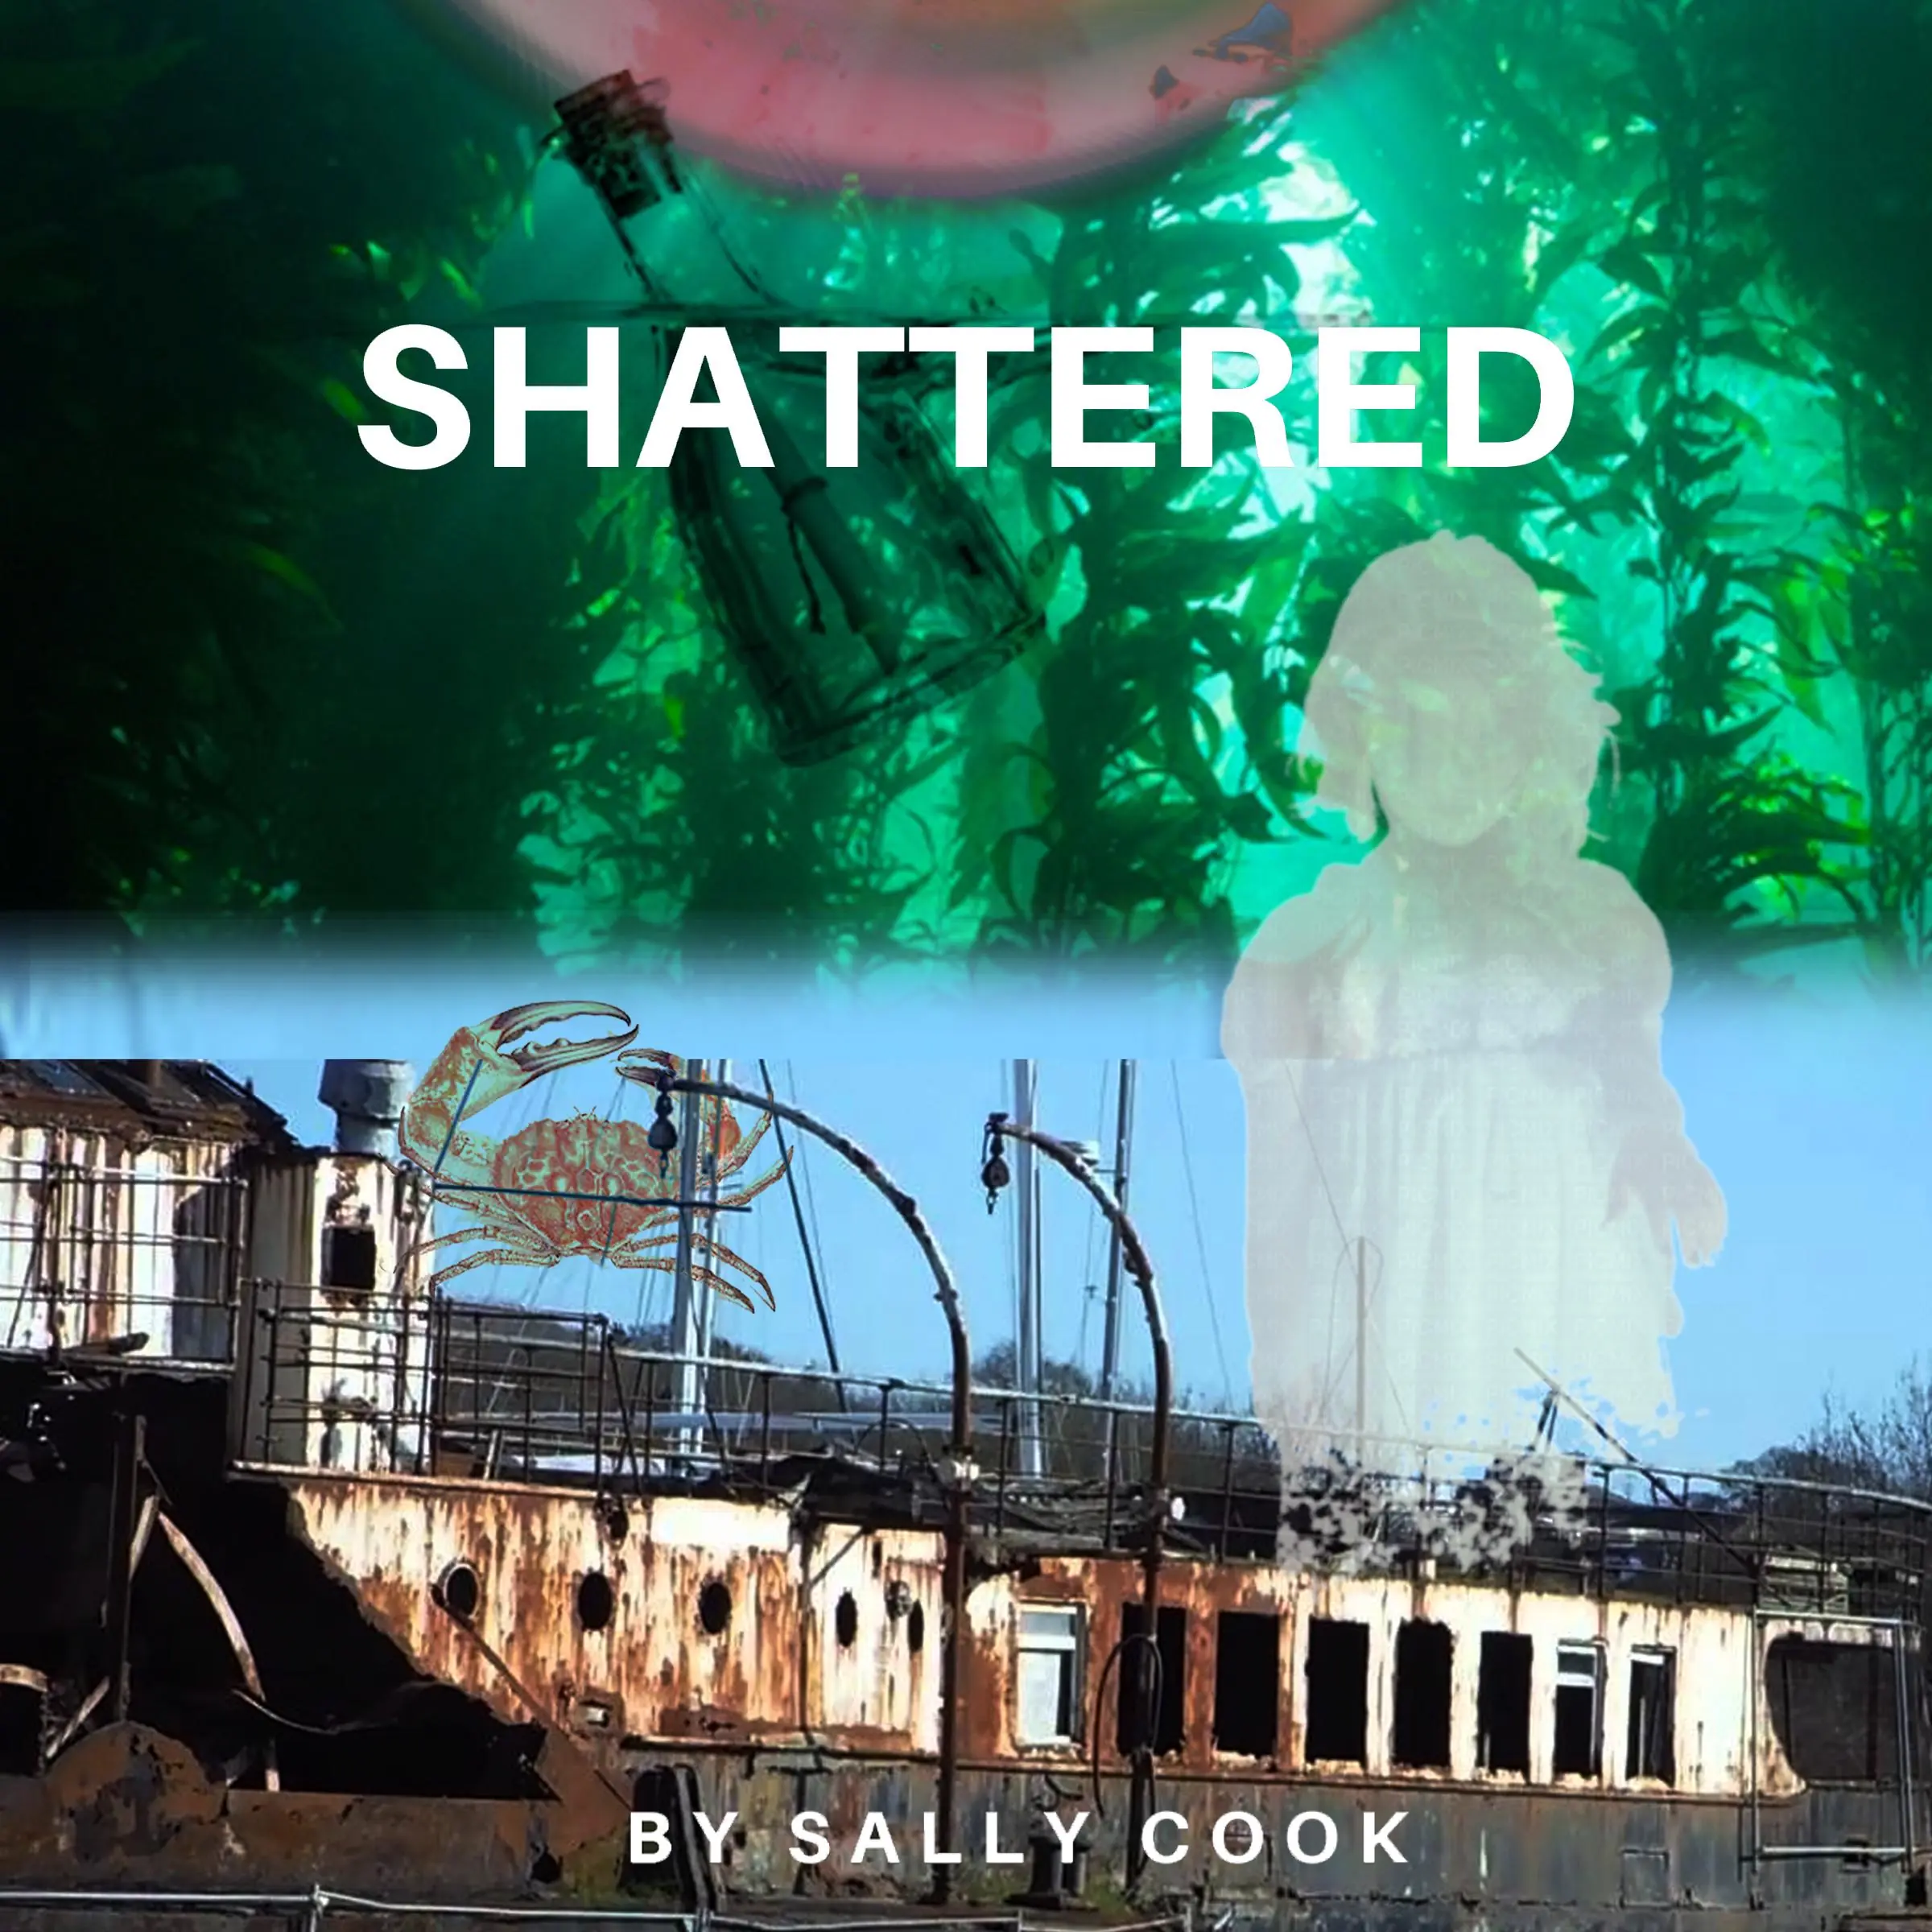 Shattered by Sally Cook Audiobook